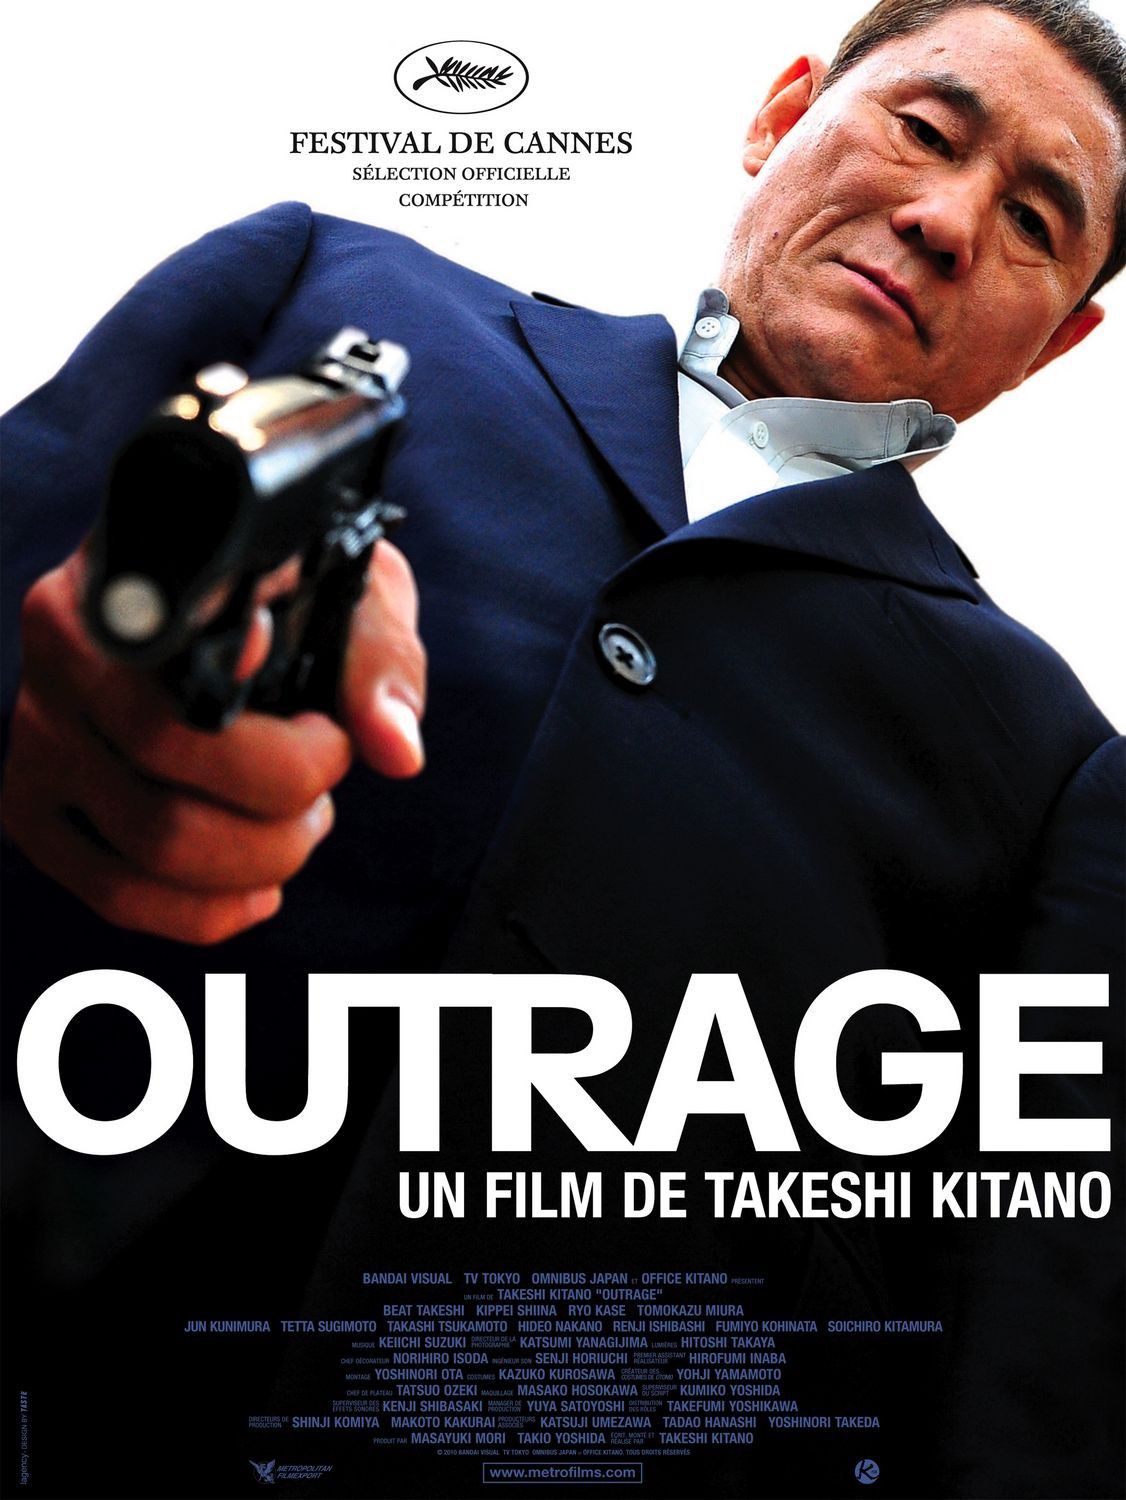 Outrage - Film (2010) streaming VF gratuit complet